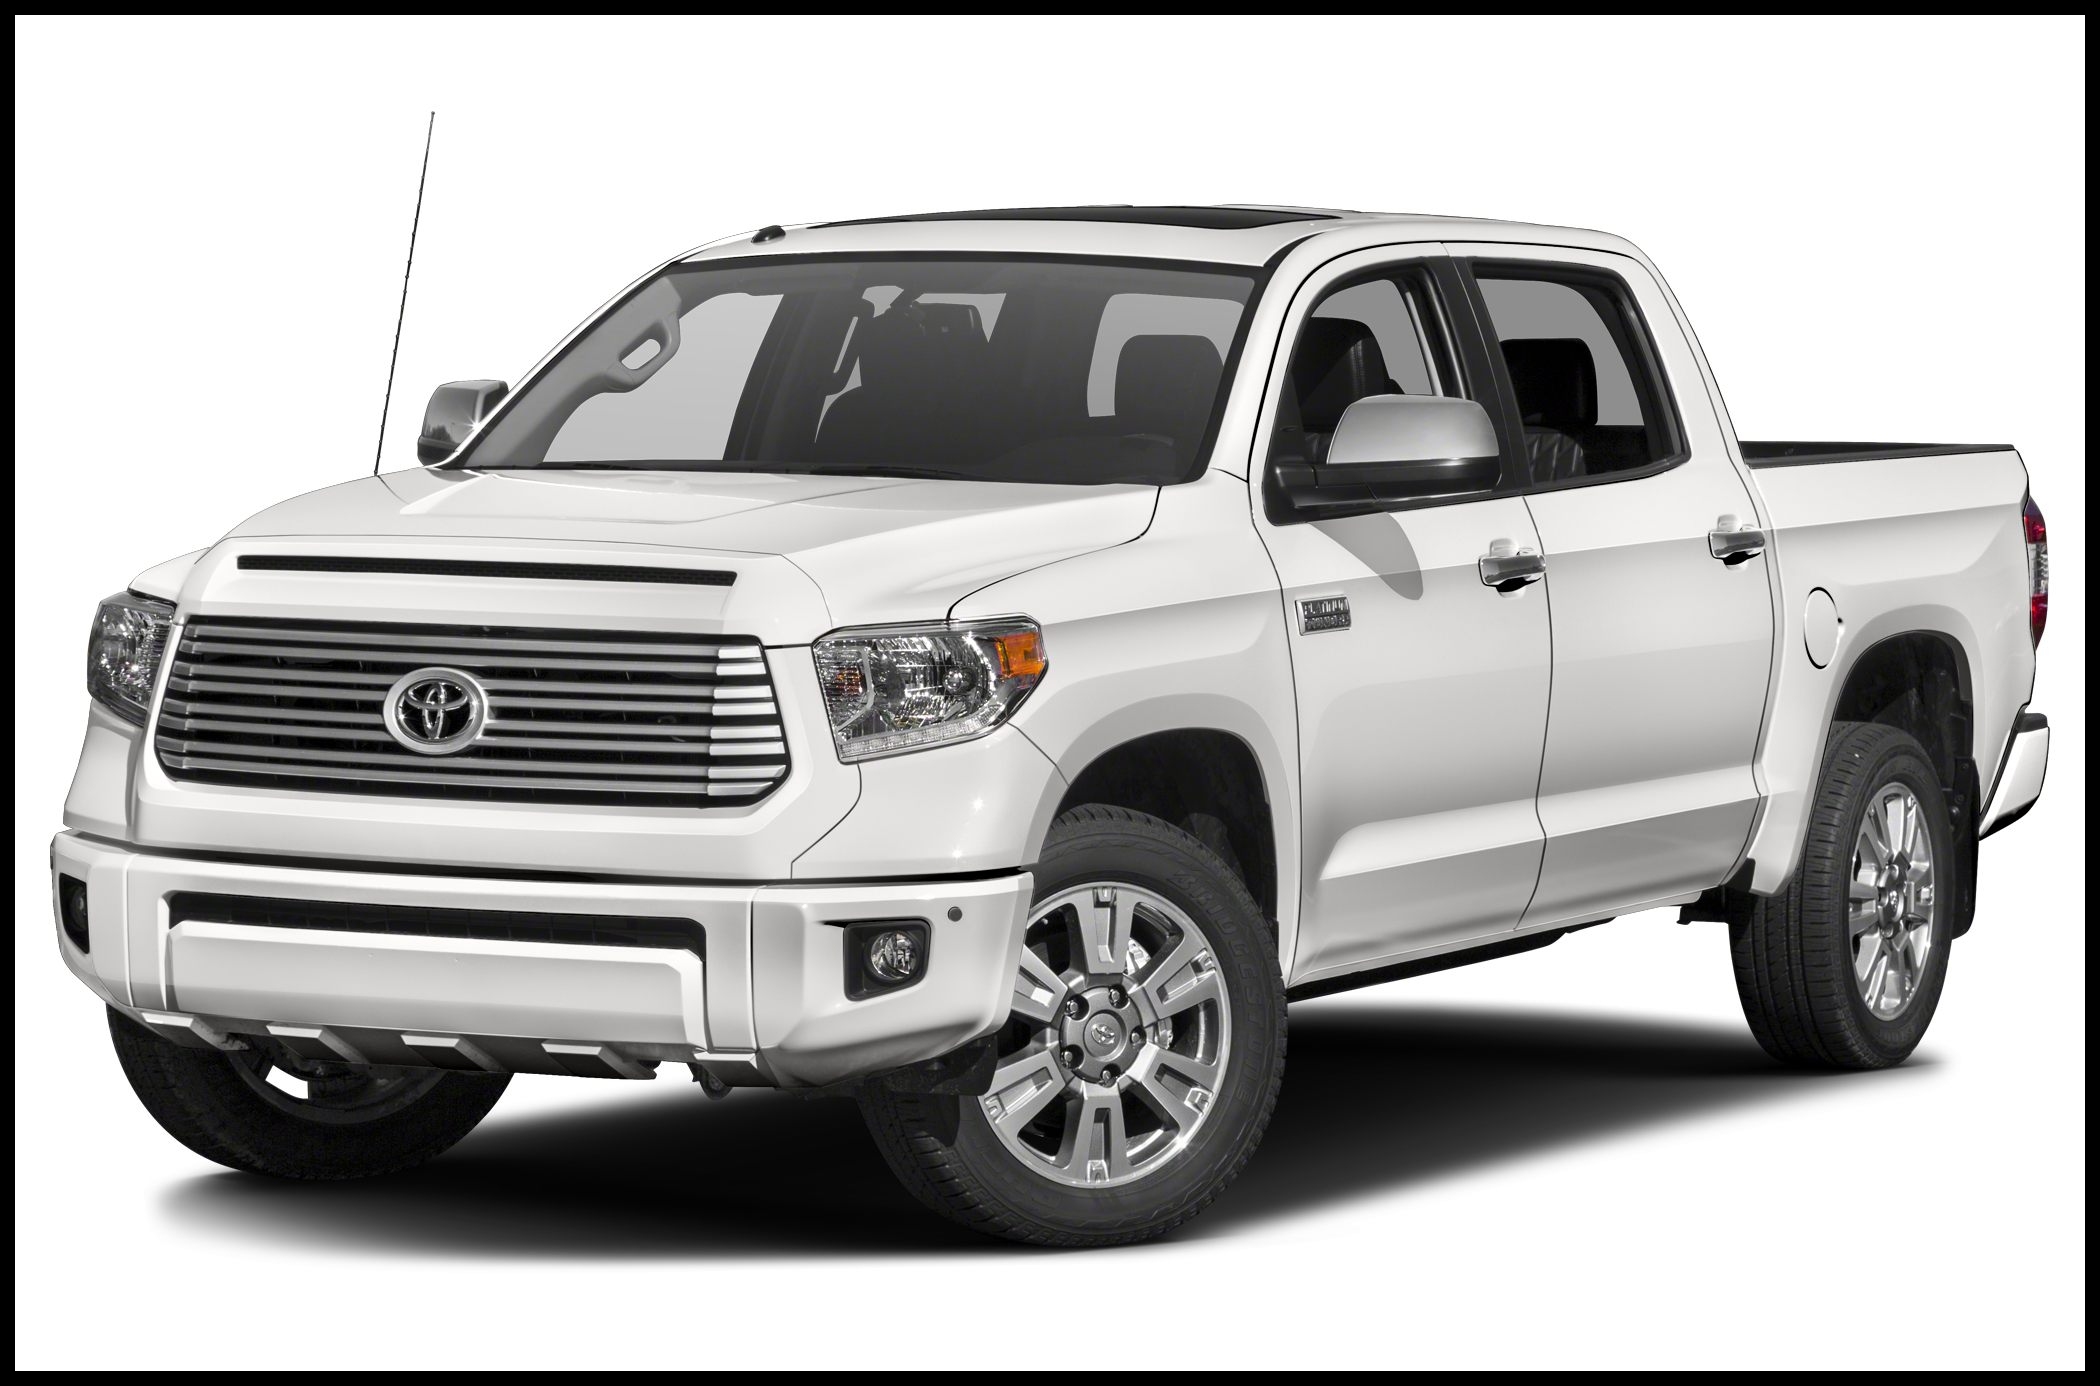 2016 Toyota Tundra Platinum 5 7L V8 4x2 CrewMax 5 6 ft box 145 7 in WB Specs and Prices